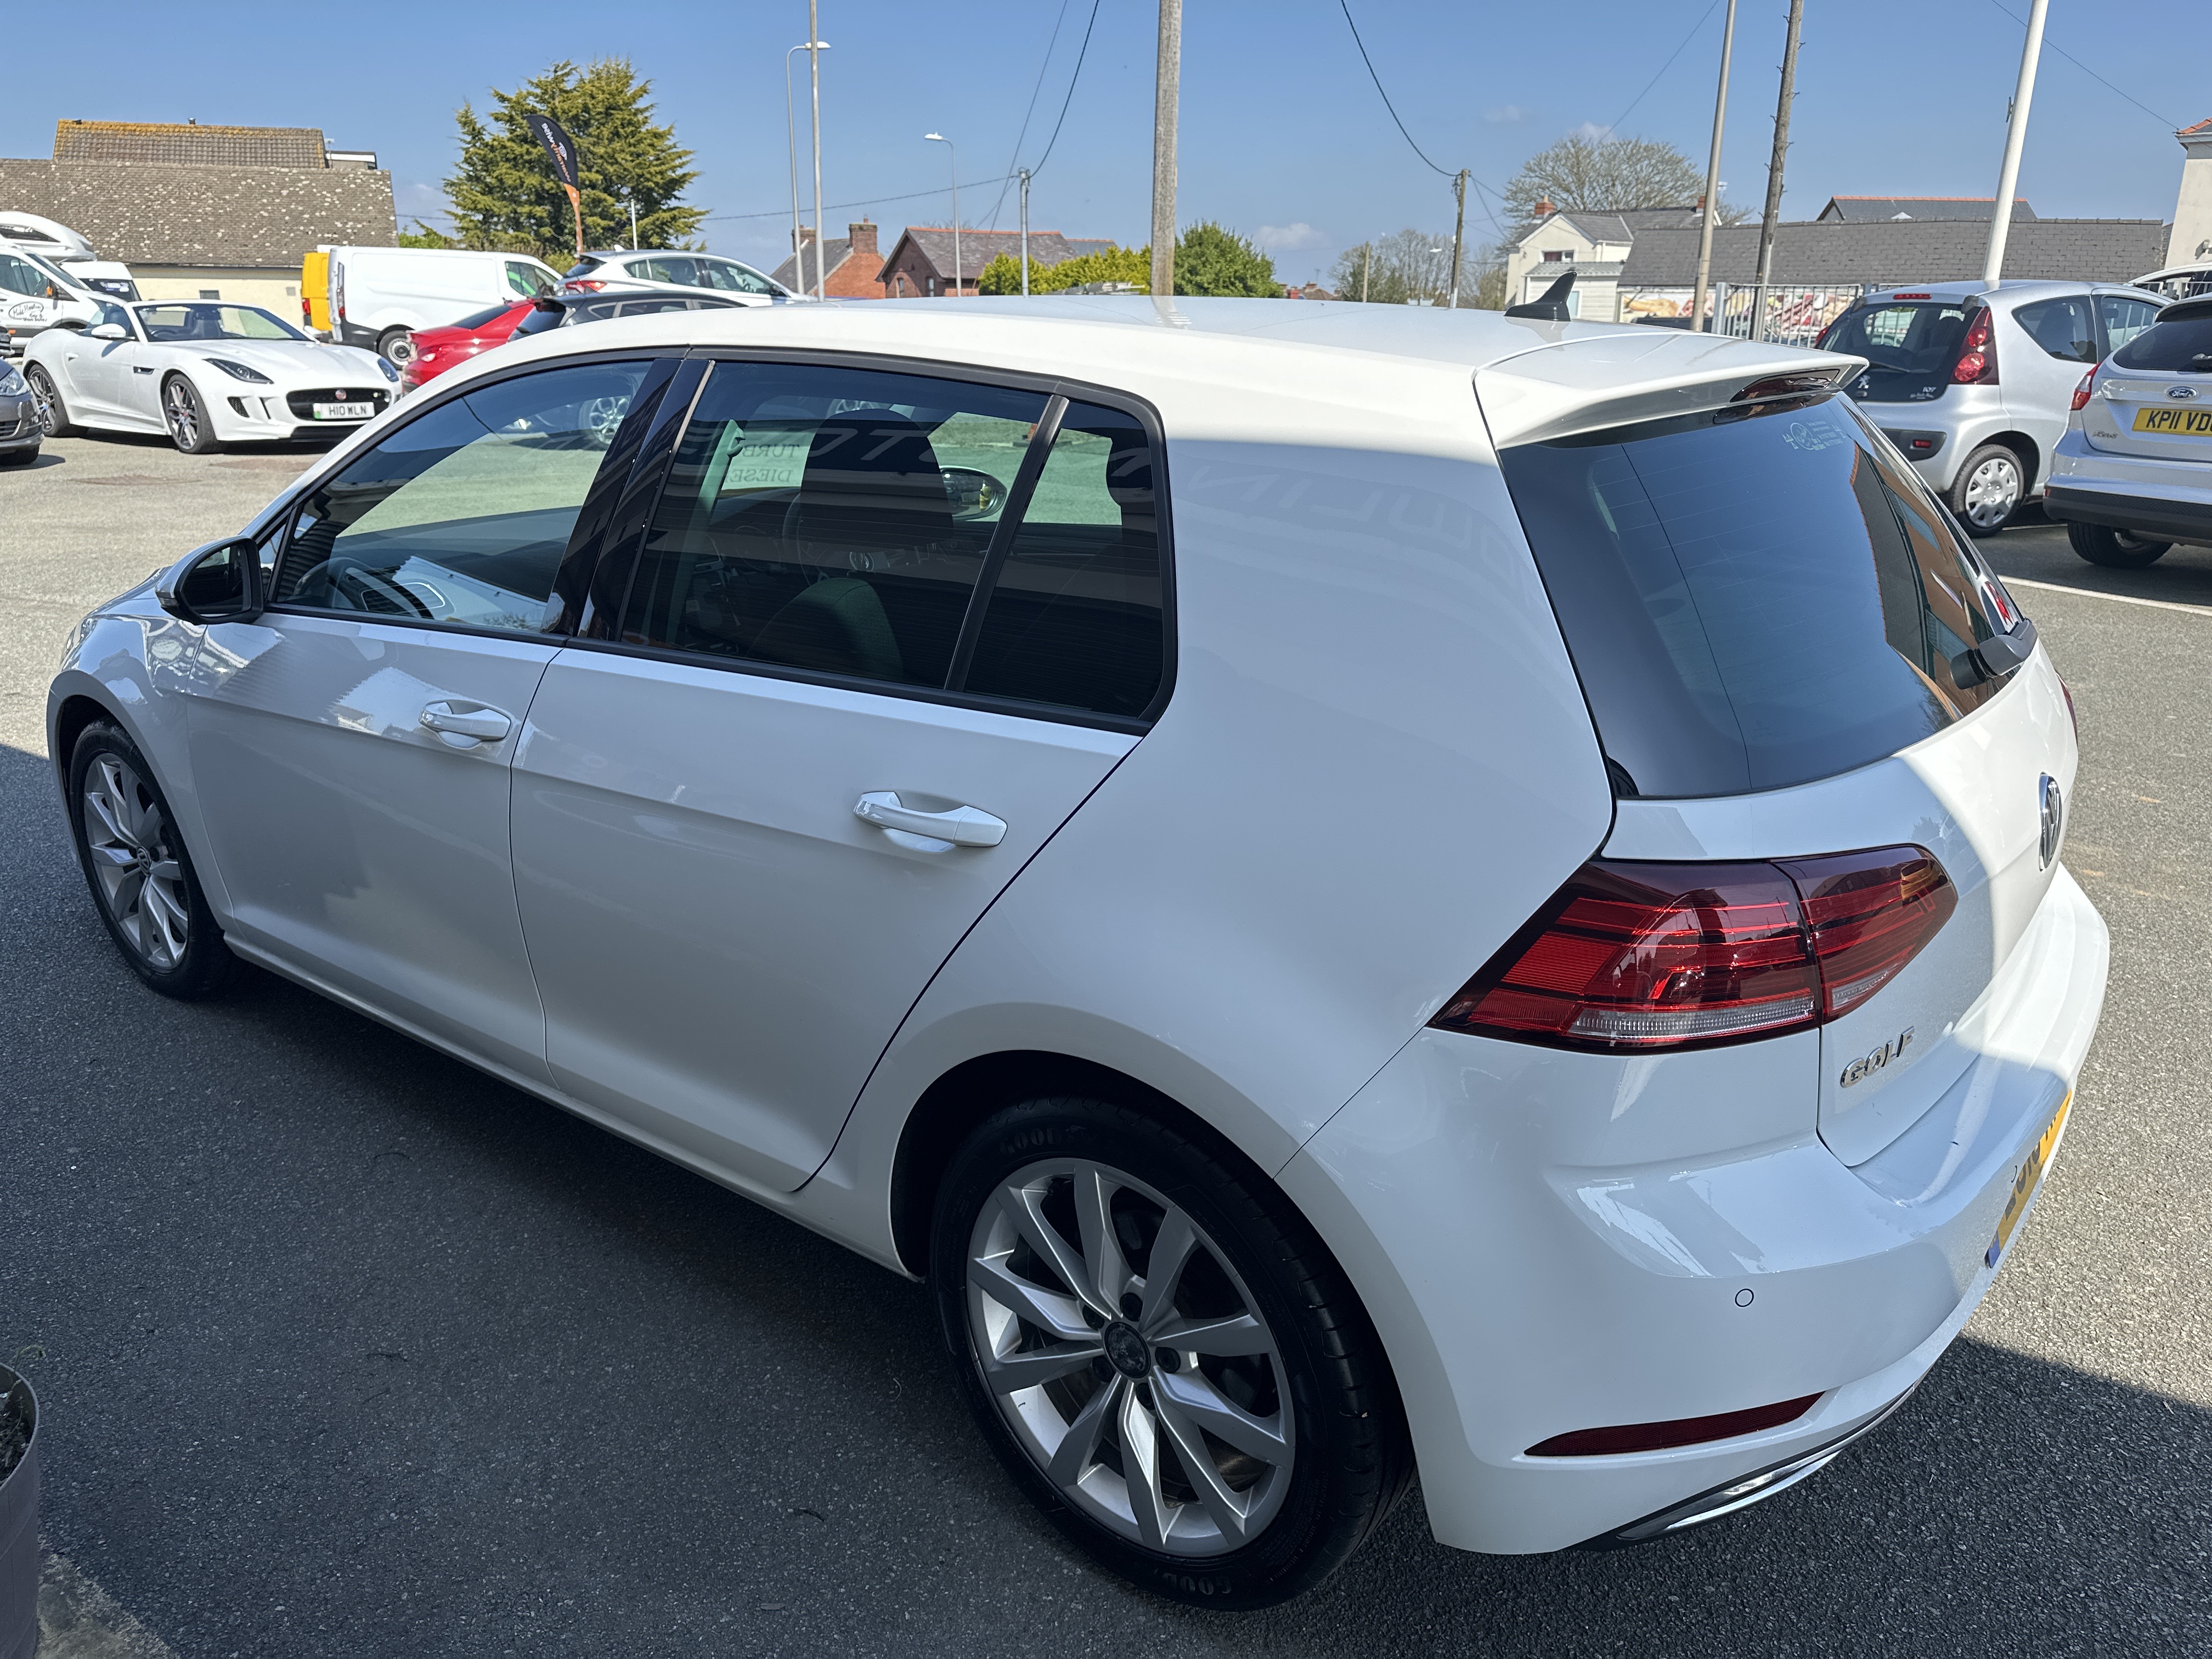 Volkswagen GOLF GT TDI  for sale at Mike Howlin Motor Sales Pembrokeshire